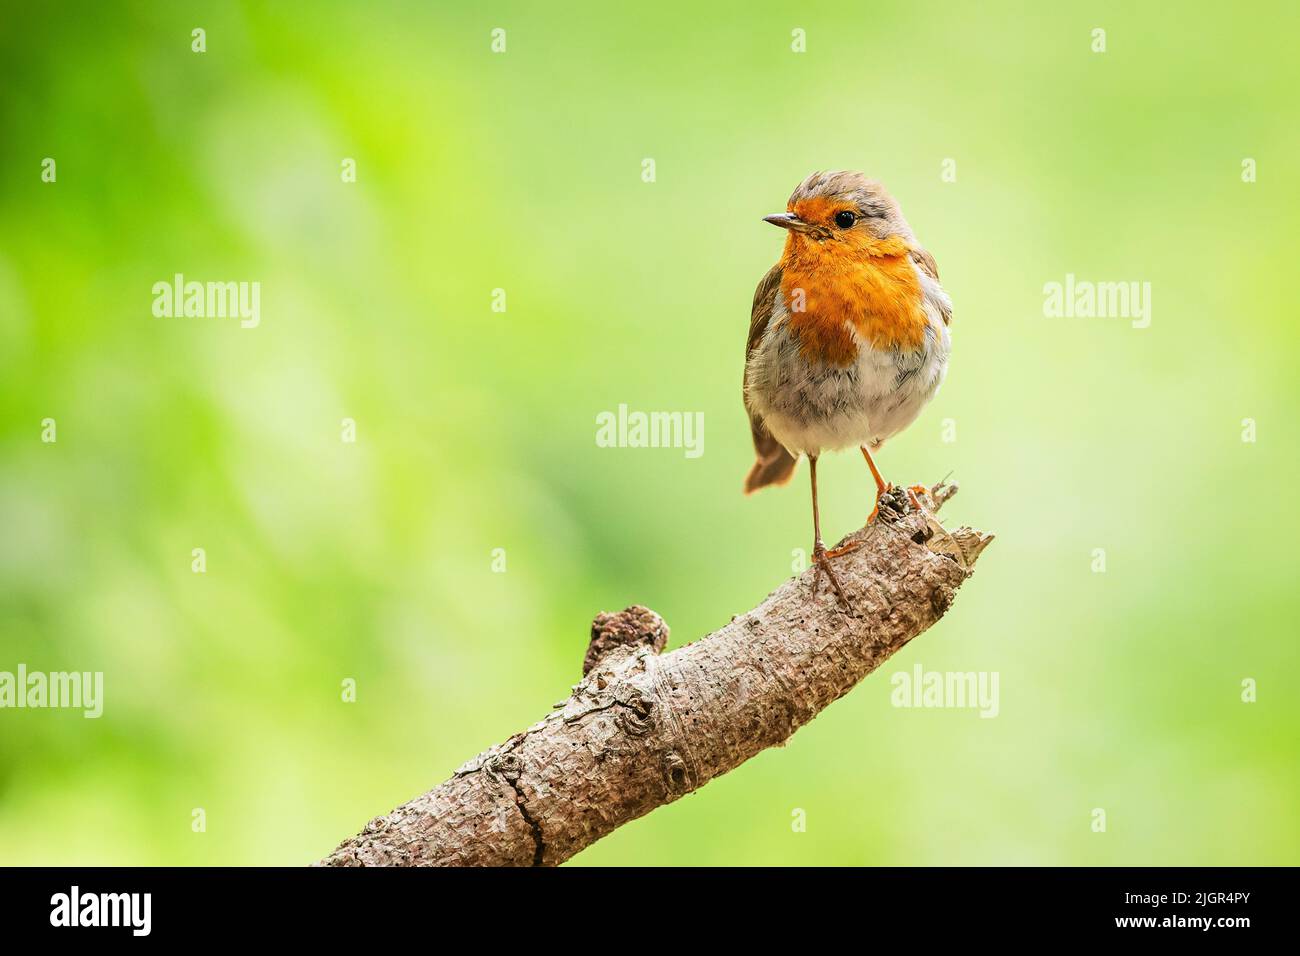 The European robin, a cute small passerine songbird with red breast, perching on a branch in a forest. Plain green background. Stock Photo